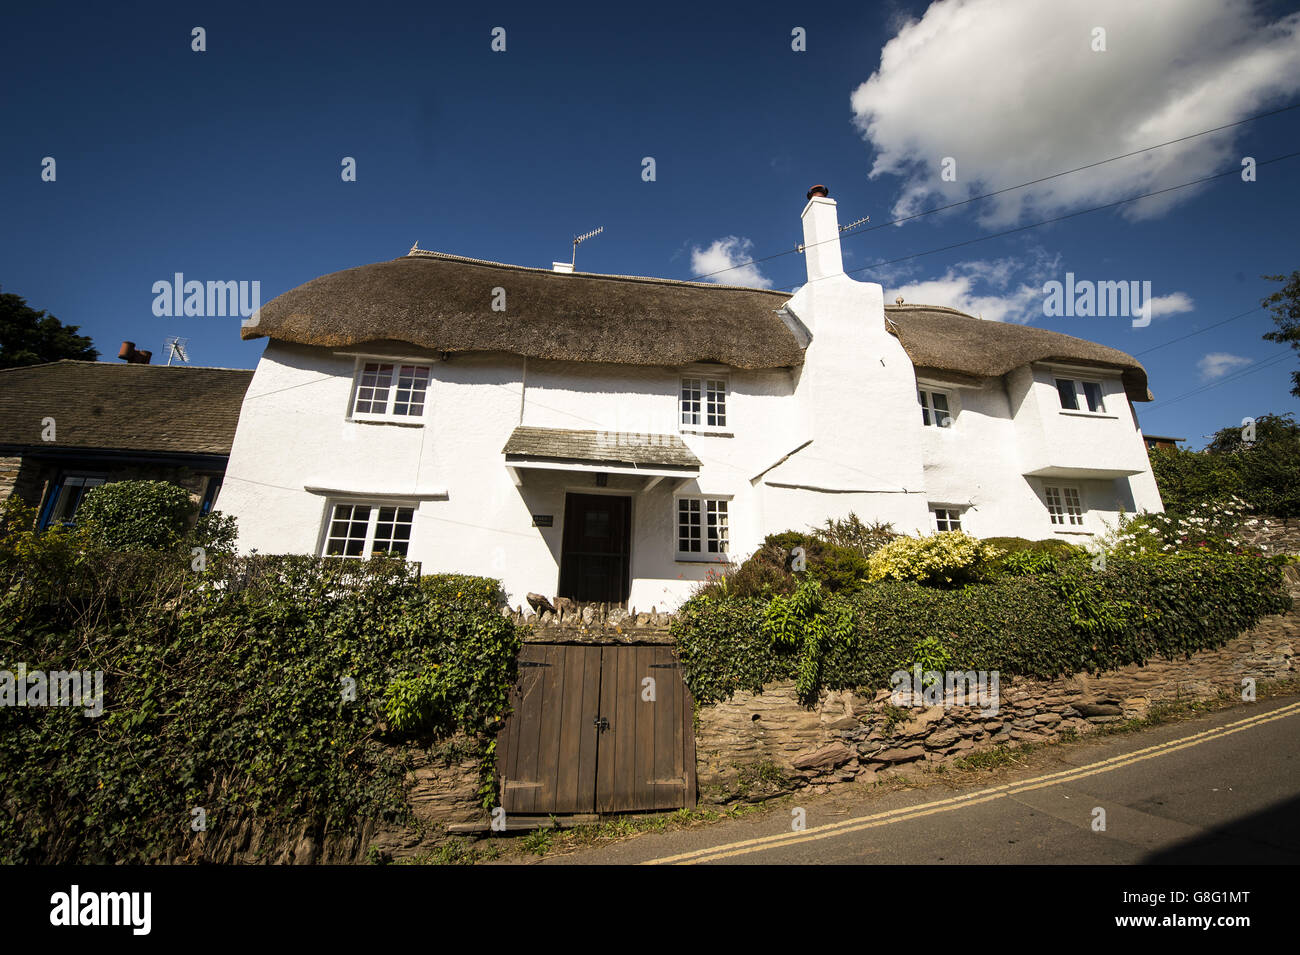 A cottage in the village of Thurlestone, Devon. PRESS ASSOCIATION Photo. Picture date: September, 26, 2015. Photo credit should read: Ben Birchall Stock Photo